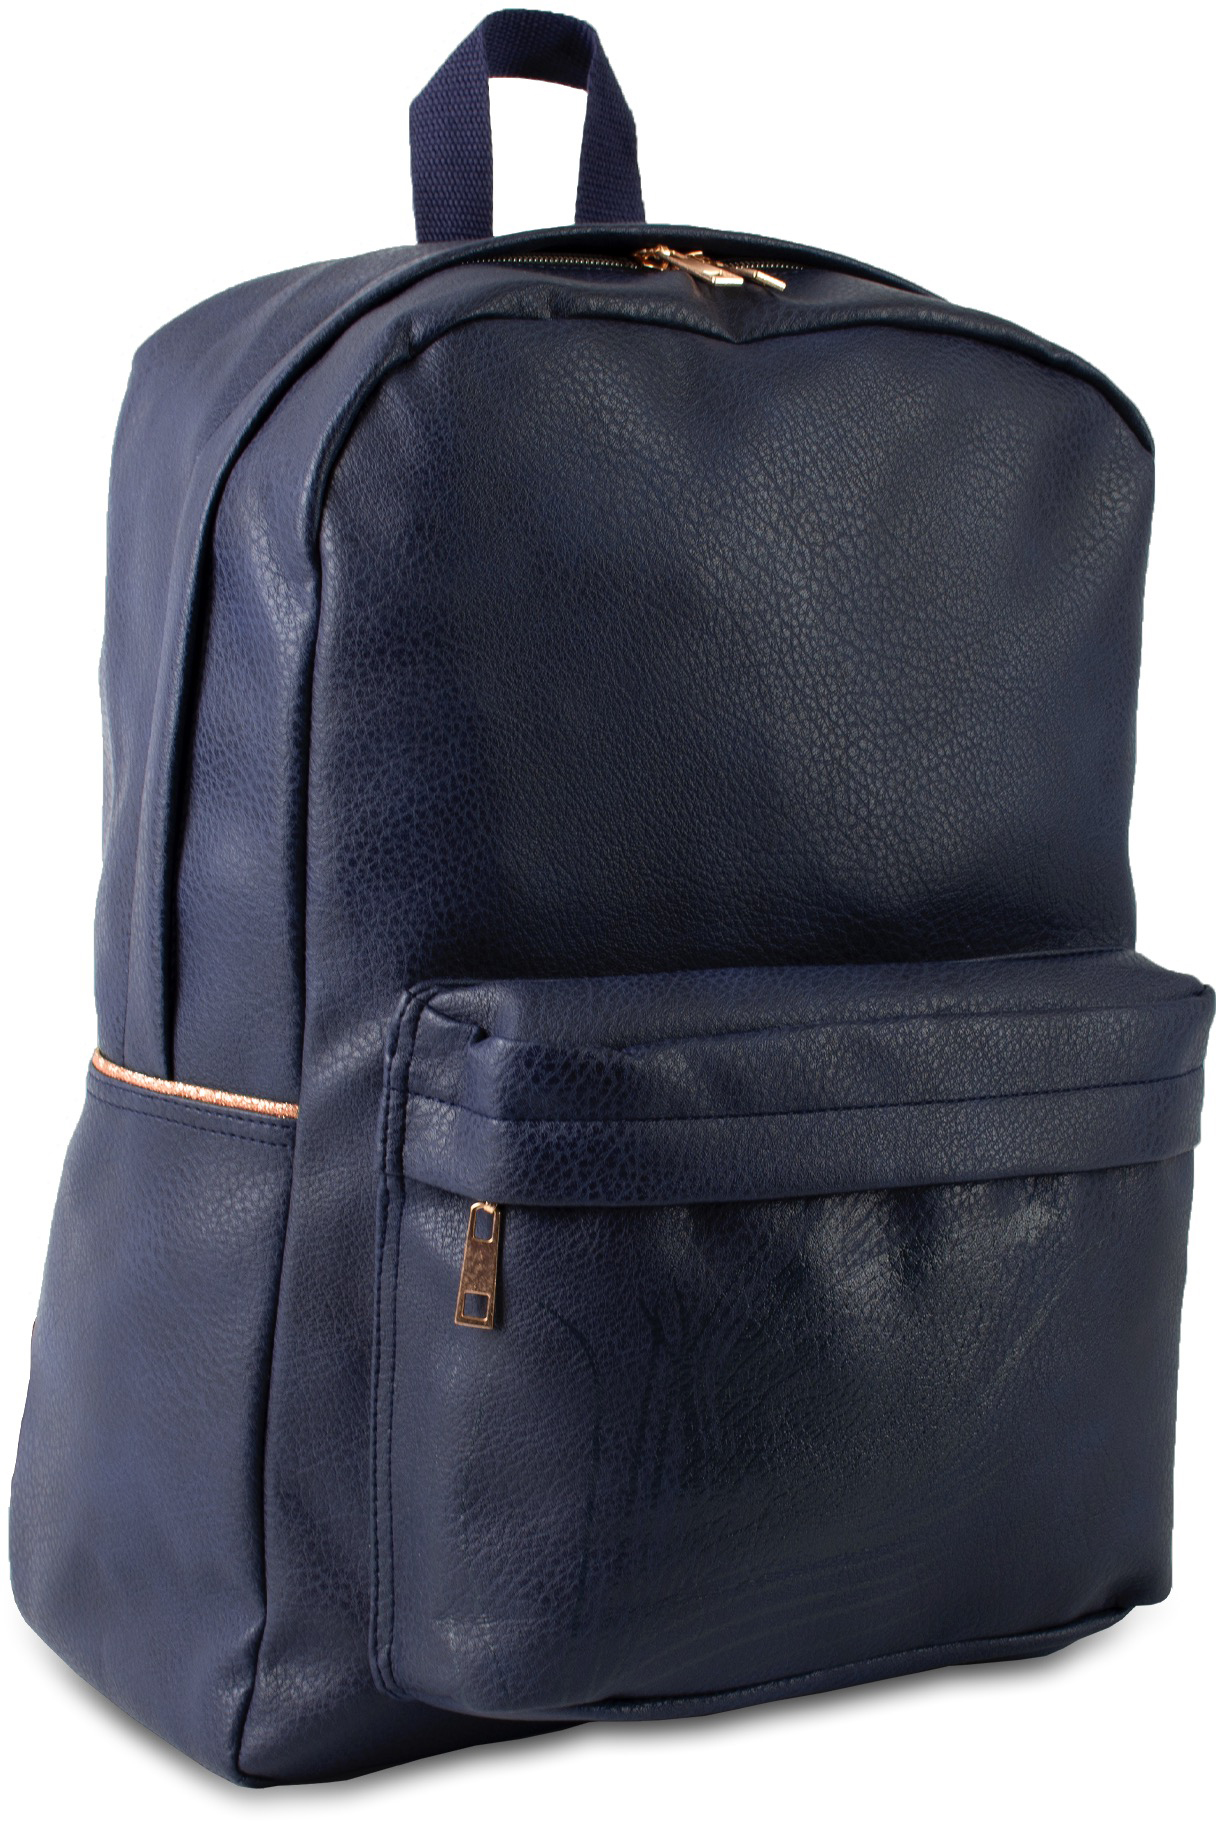 ROOST Backpack 23lt 32x14x42cm 500519 Midnight gold, navy blue